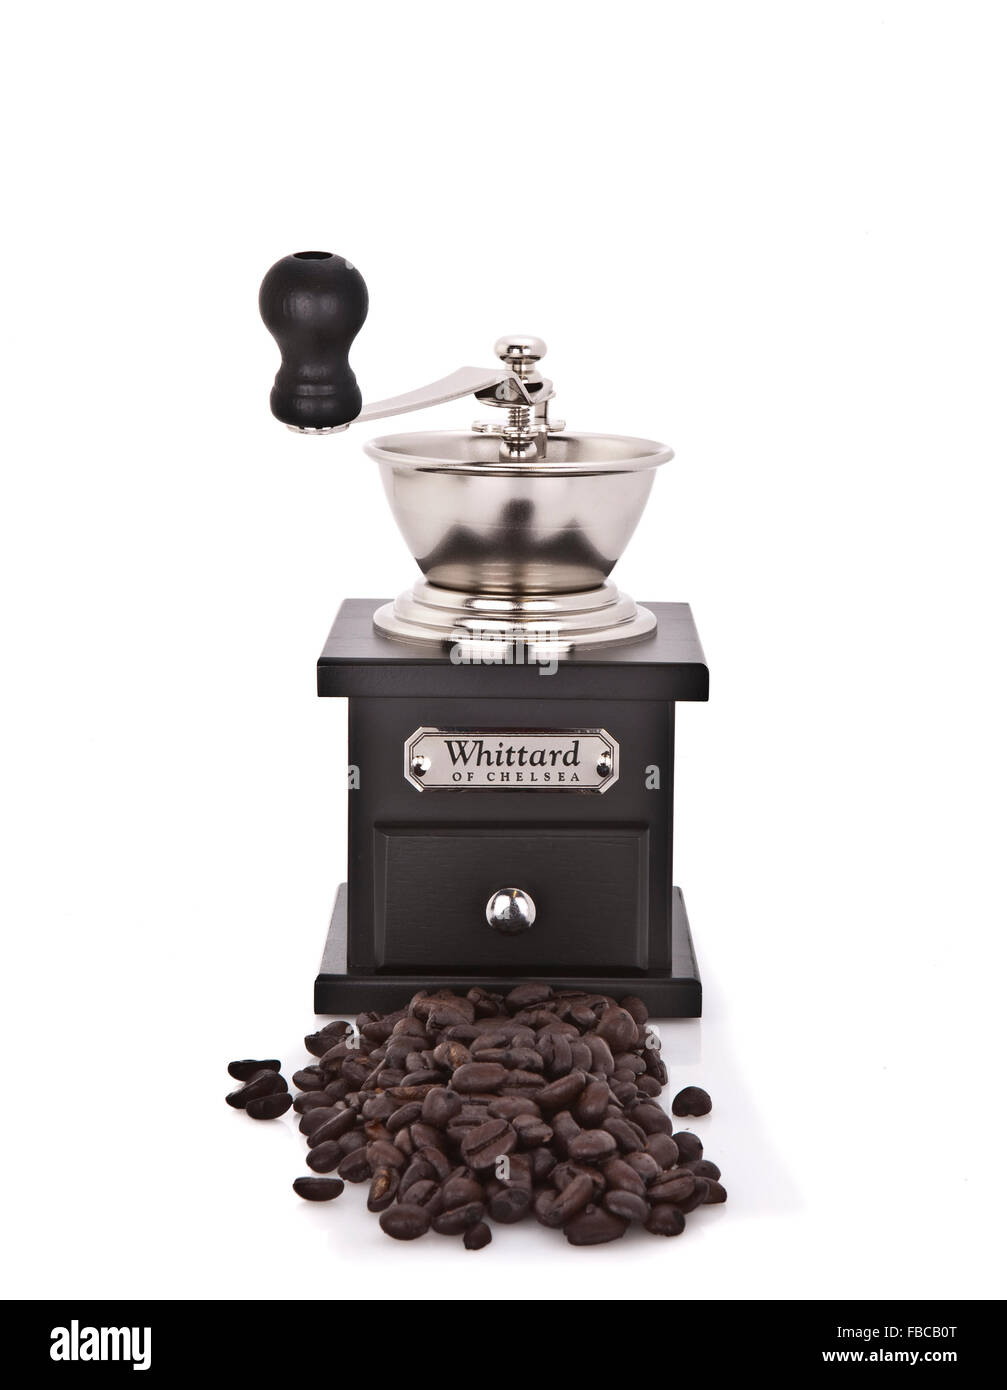 Whittards Coffee Grinder with coffee beans on a white background Stock Photo